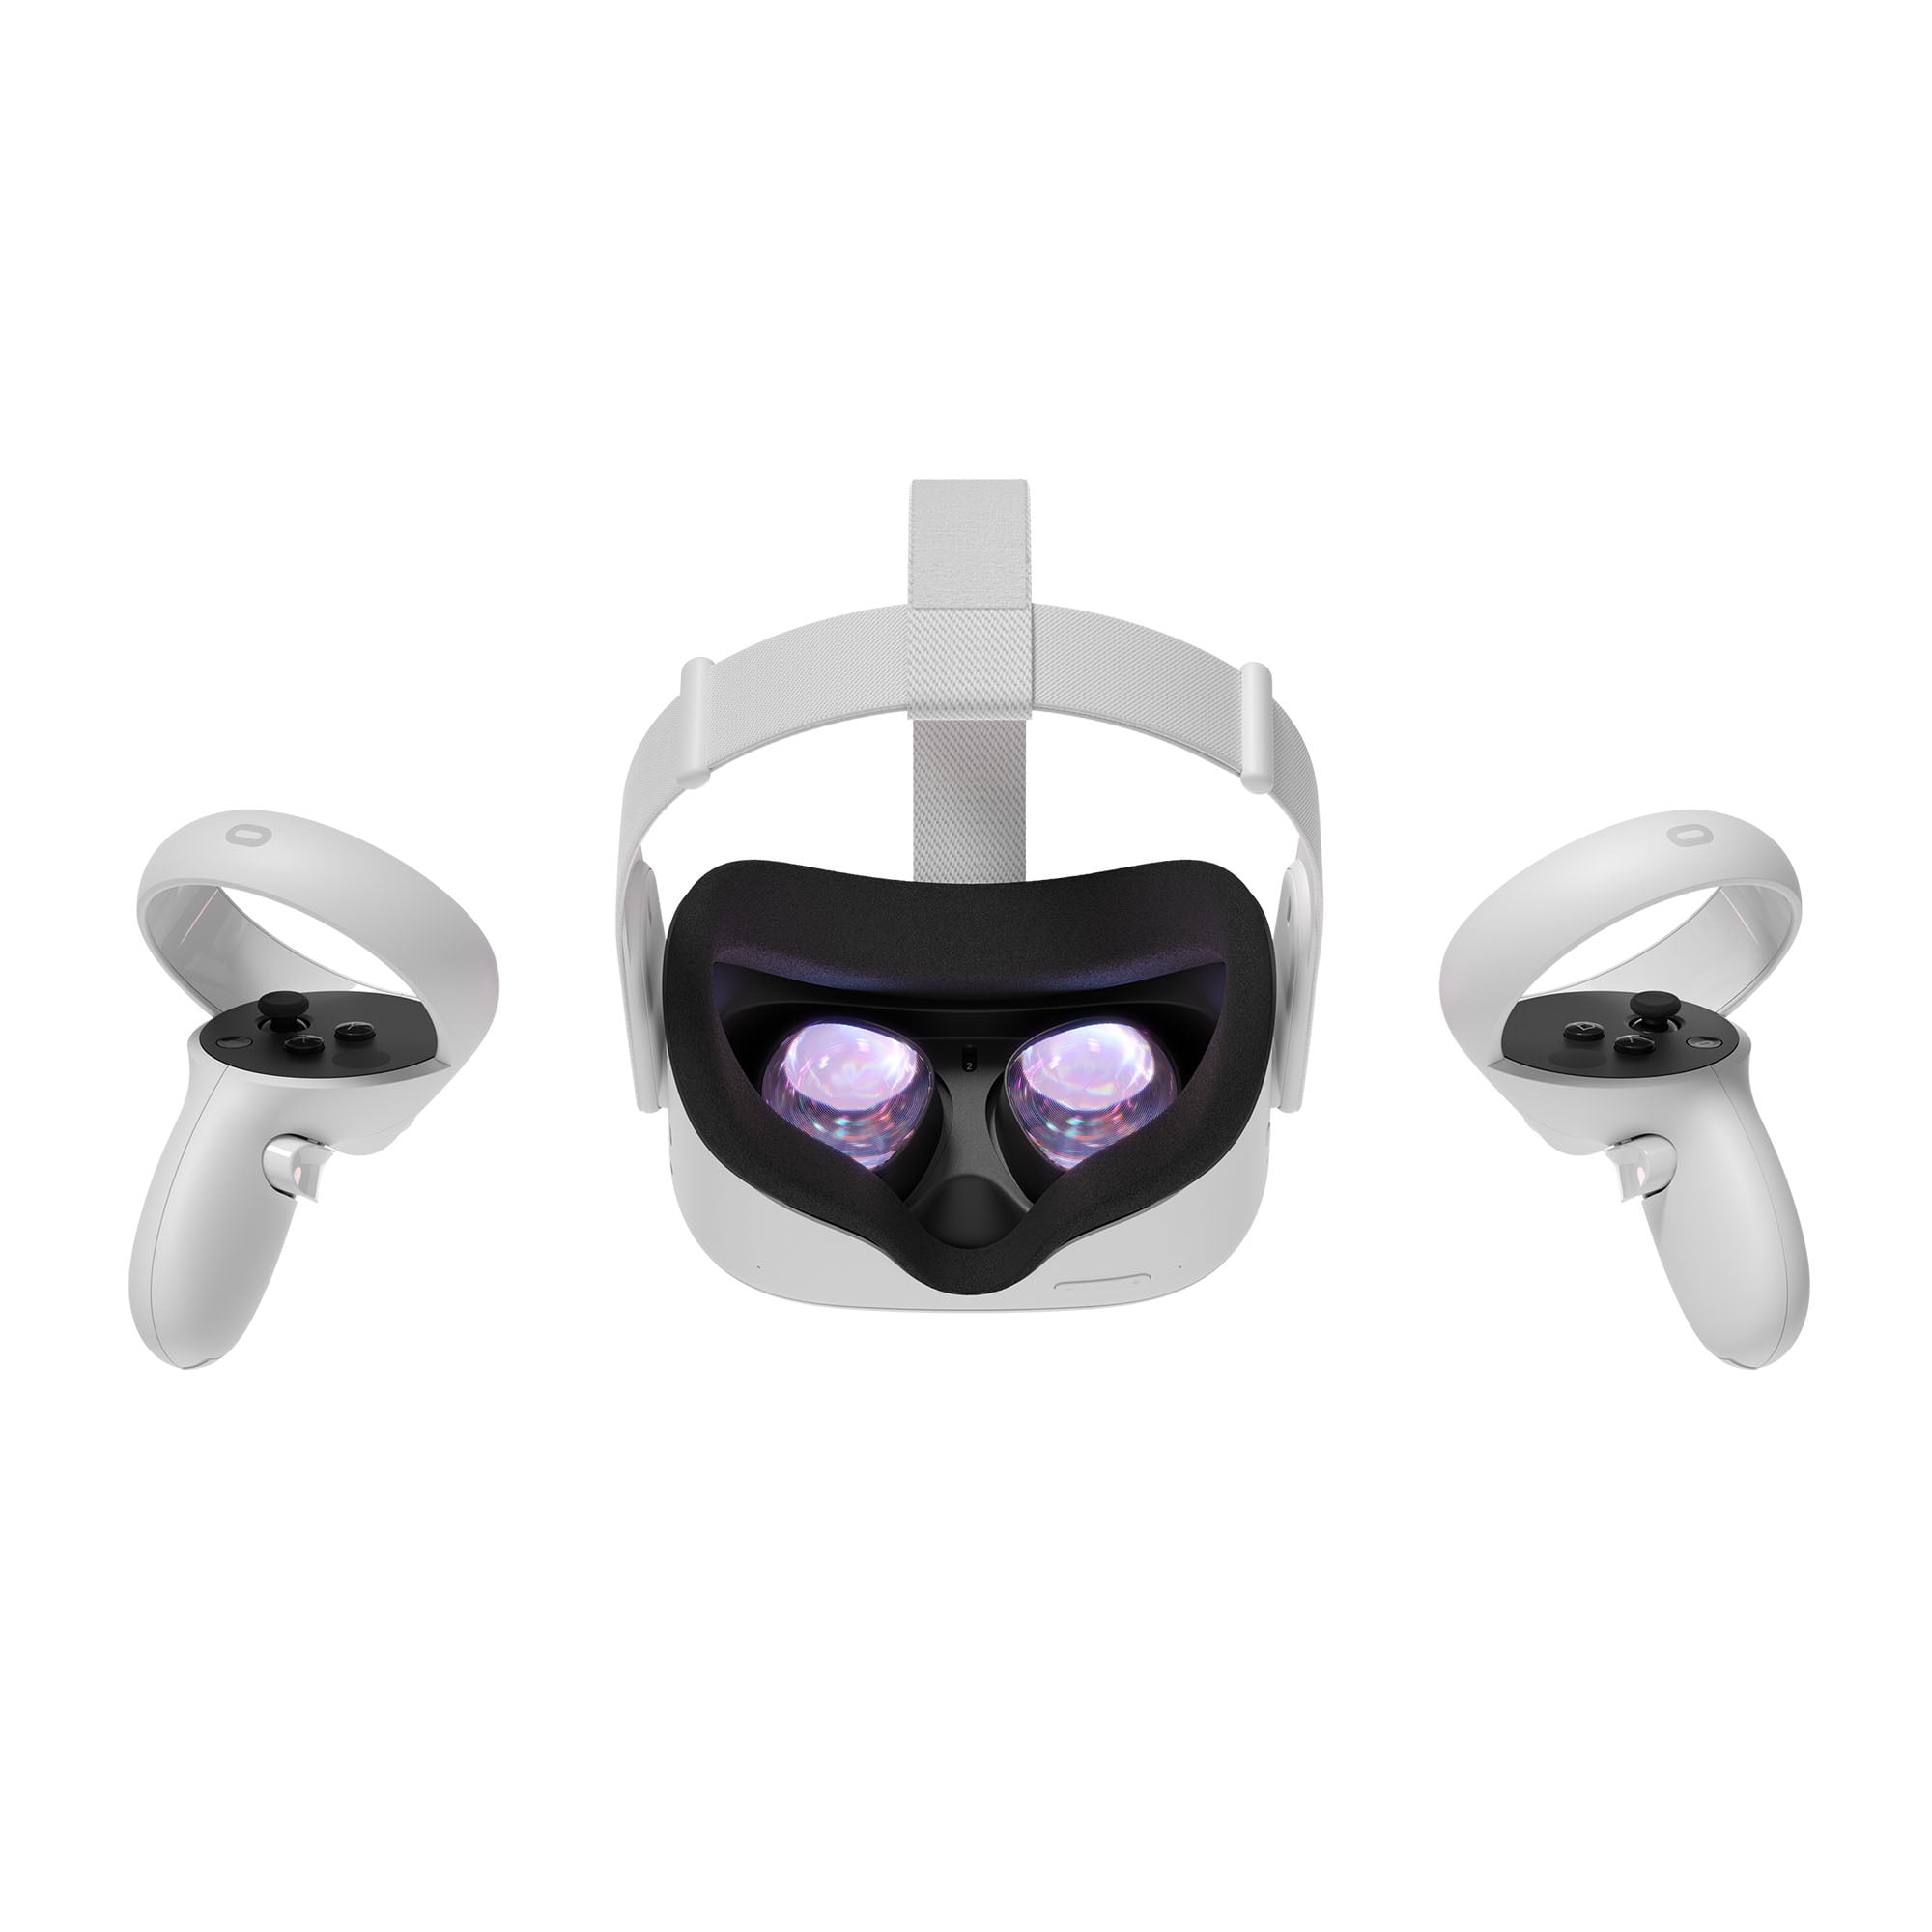 Meta Quest 2 (Oculus) - Advanced All-In-One Virtual Reality Headset - 256GB